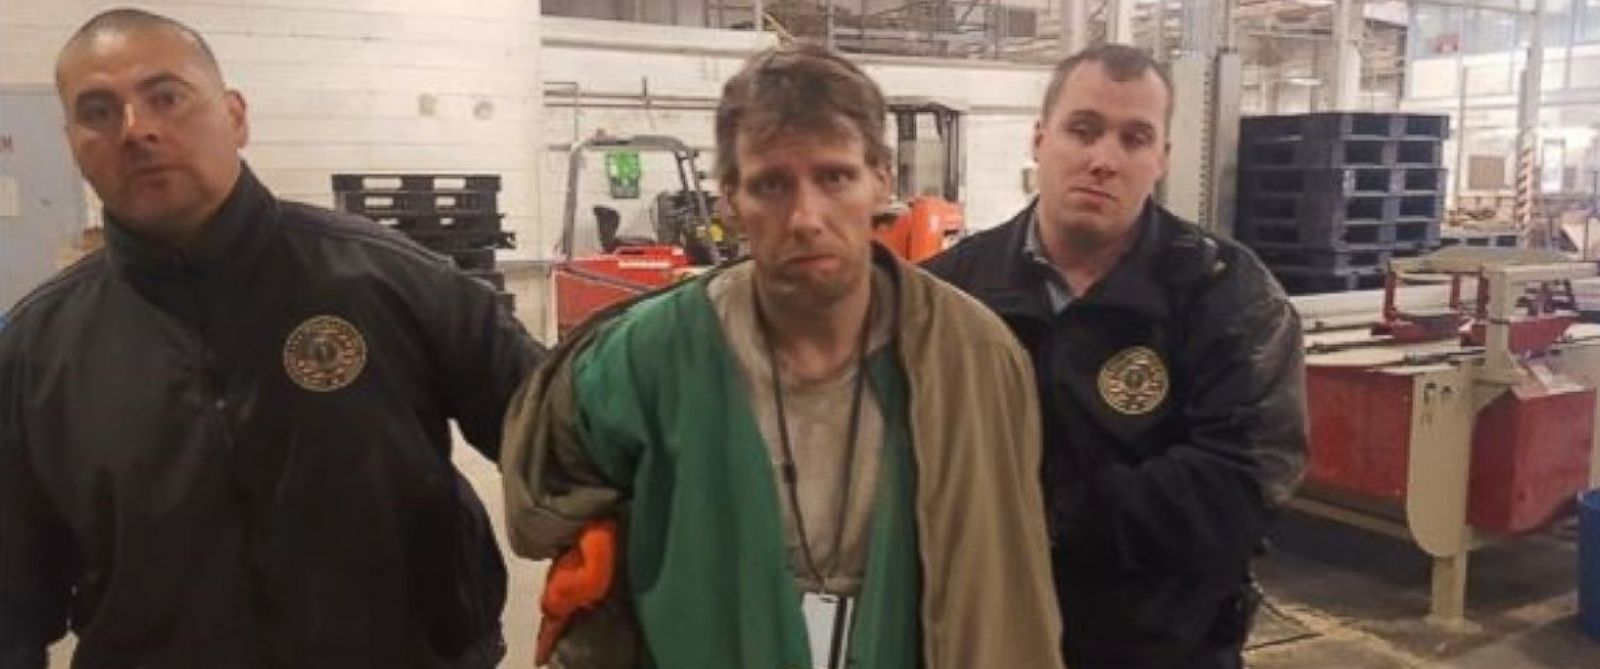 Missing Indiana prison inmate found hiding in the ceiling, officials